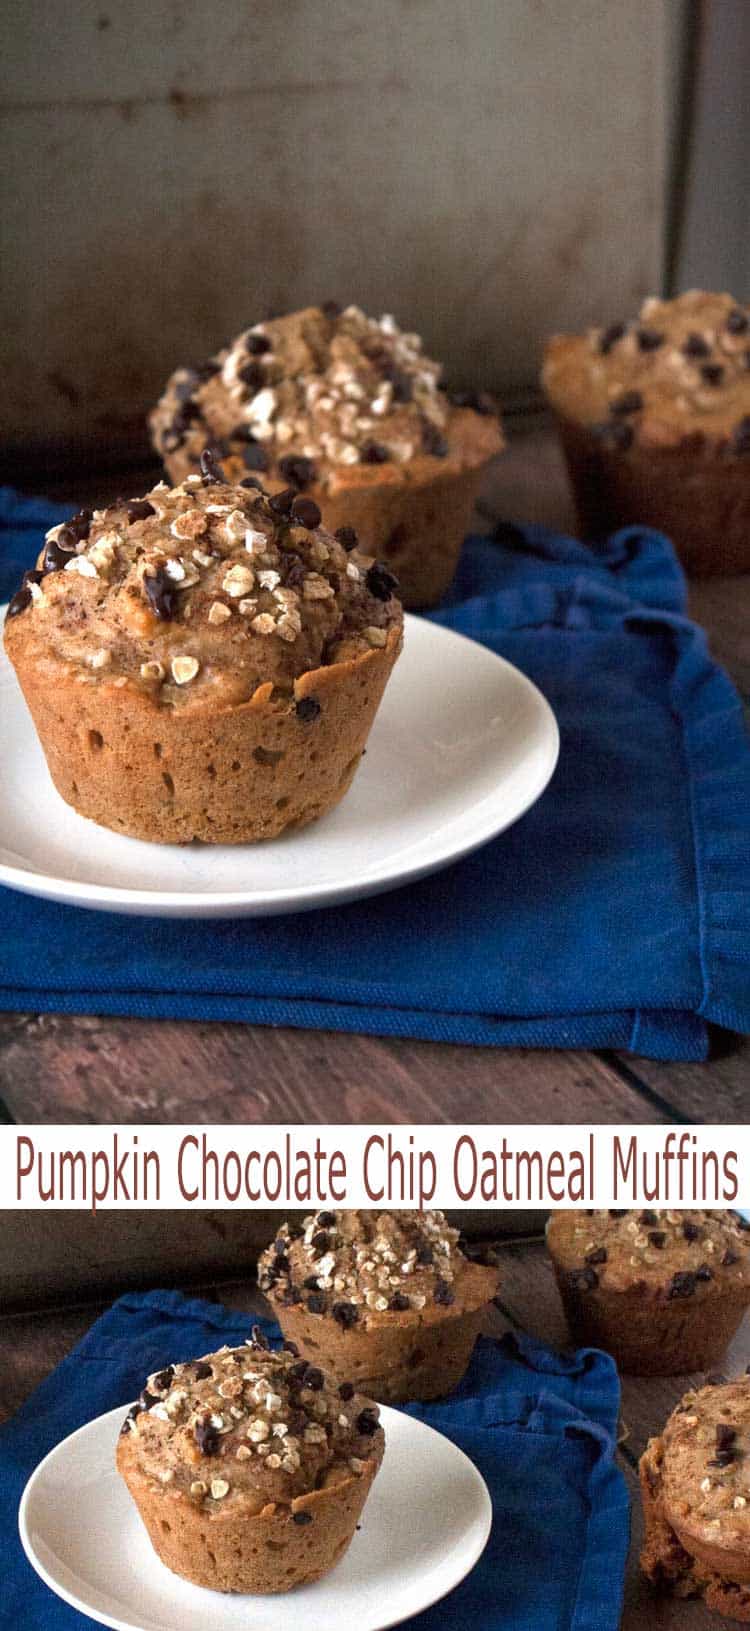 Pumpkin Oatmeal Chocolate Chip Muffins. Pumpkin Oatmeal Chocolate Chip Muffins are the best breakfast muffins recipe. They are full of healthy ingredients and a touch of sweetness that makes them a healthier for you breakfast option than some other muffins. You'll love this easy muffin recipe. #pumpkin #recipes #muffins #chocolatechips